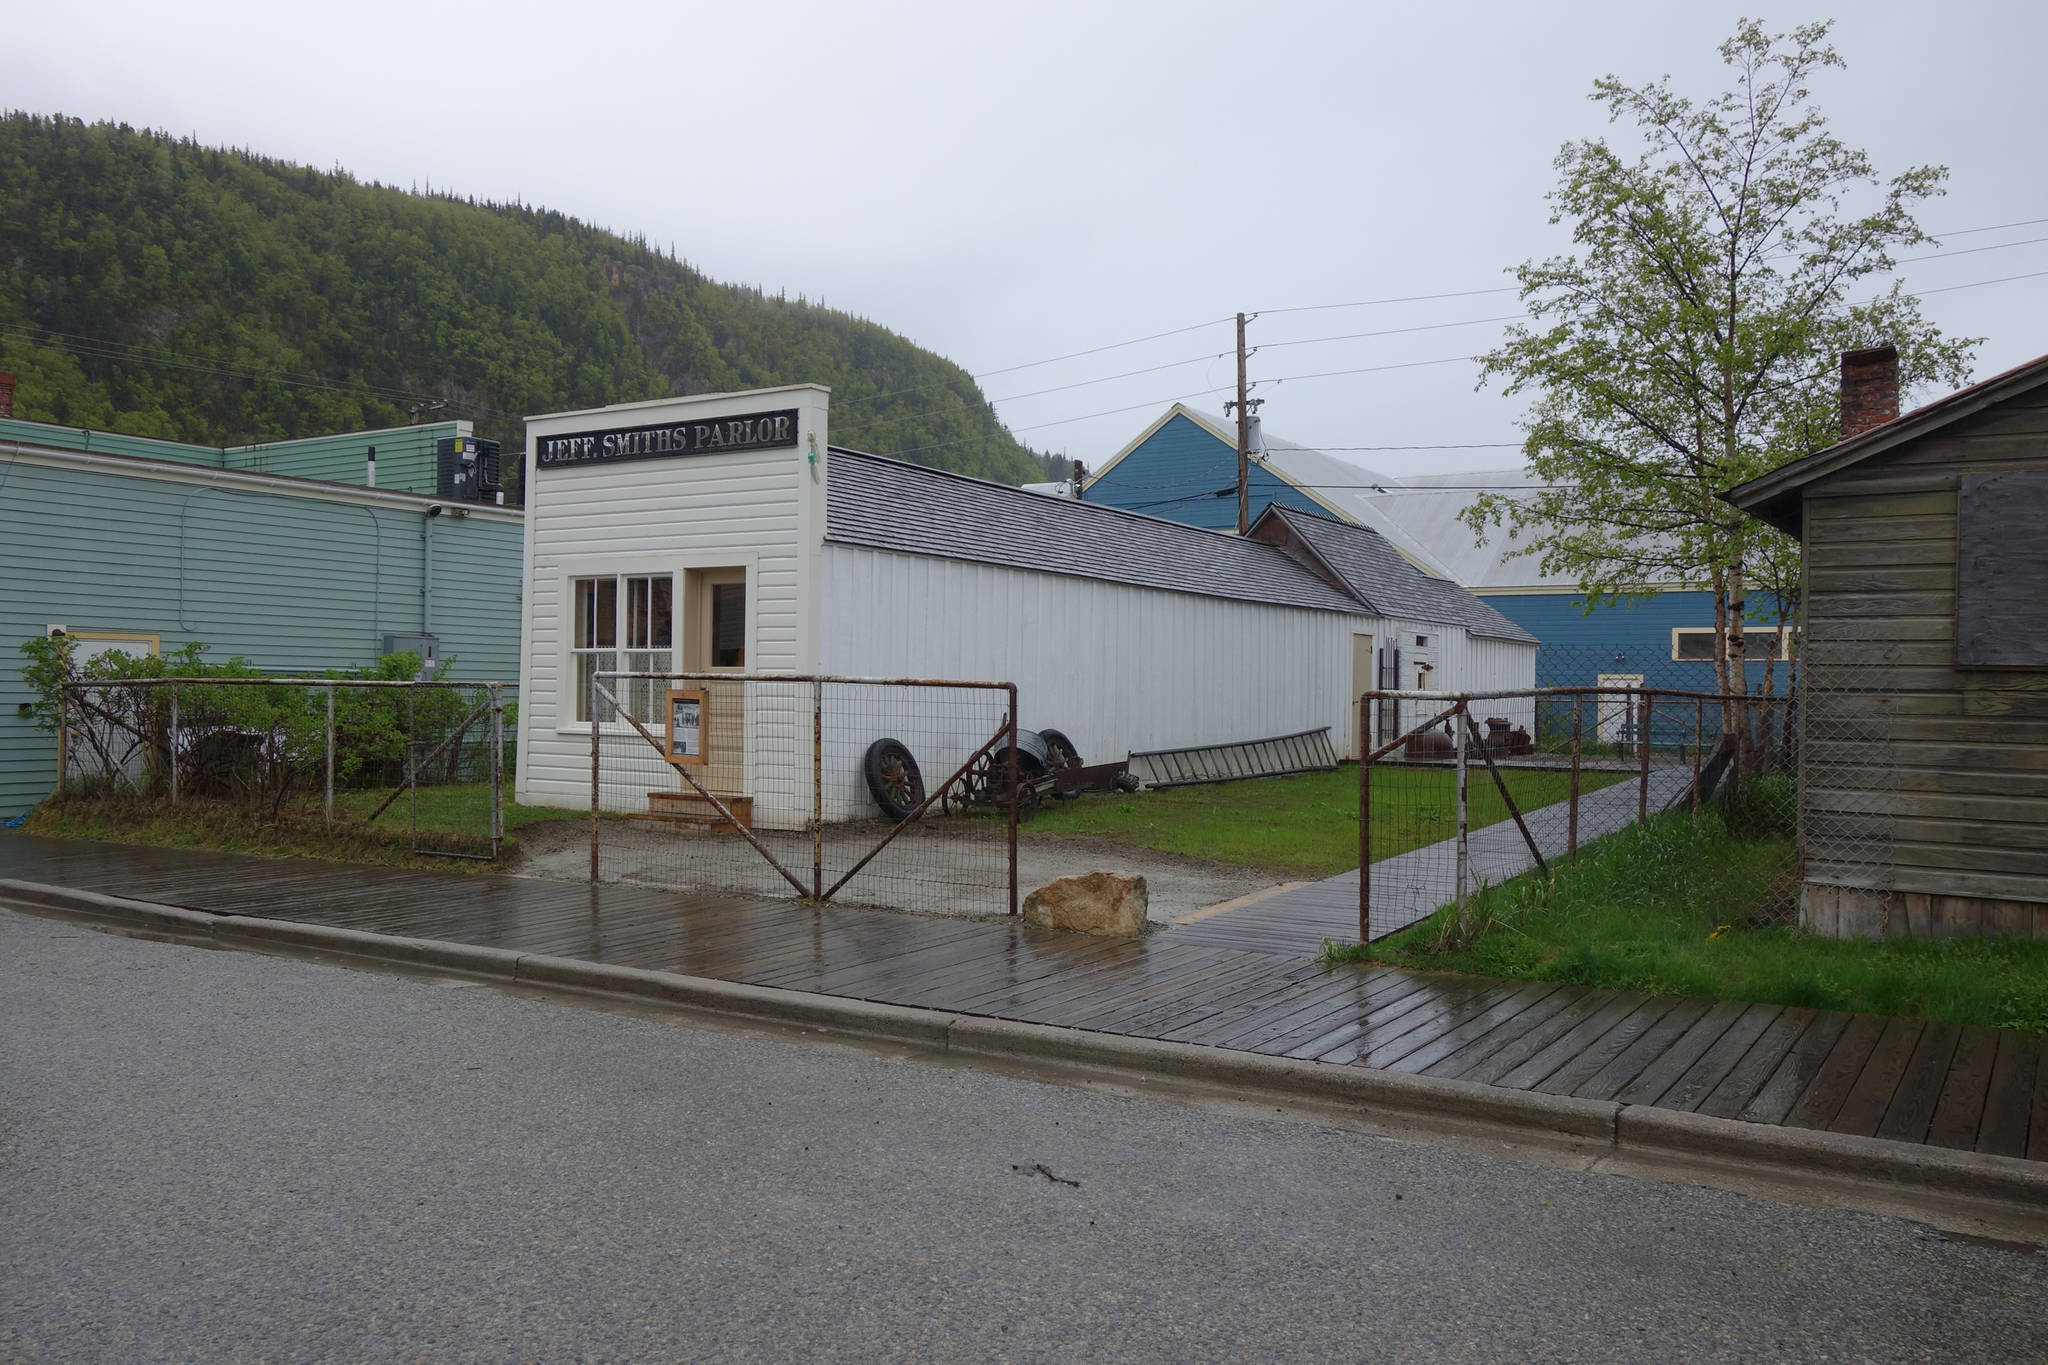 The Jeff Smith’s Parlor Museum on Second Ave and Broadway in Skagway. CCW file photo.